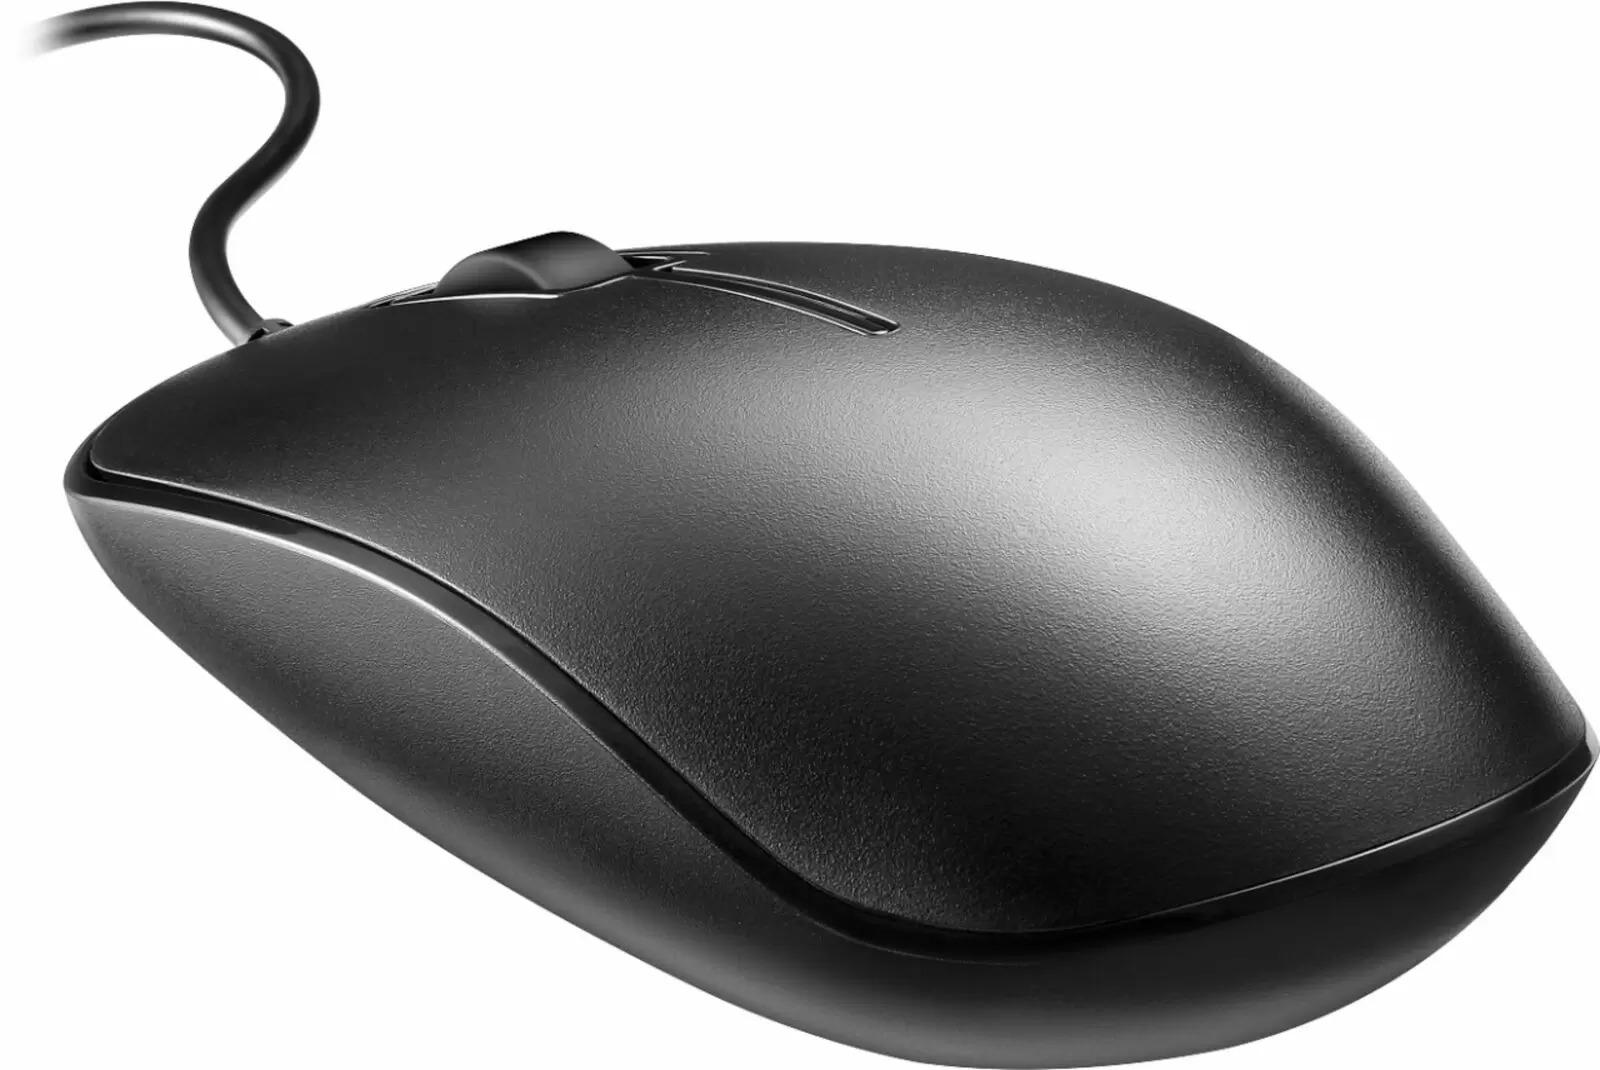 Best Buy Essentials USB Wired Mouse for $3.49 Shipped